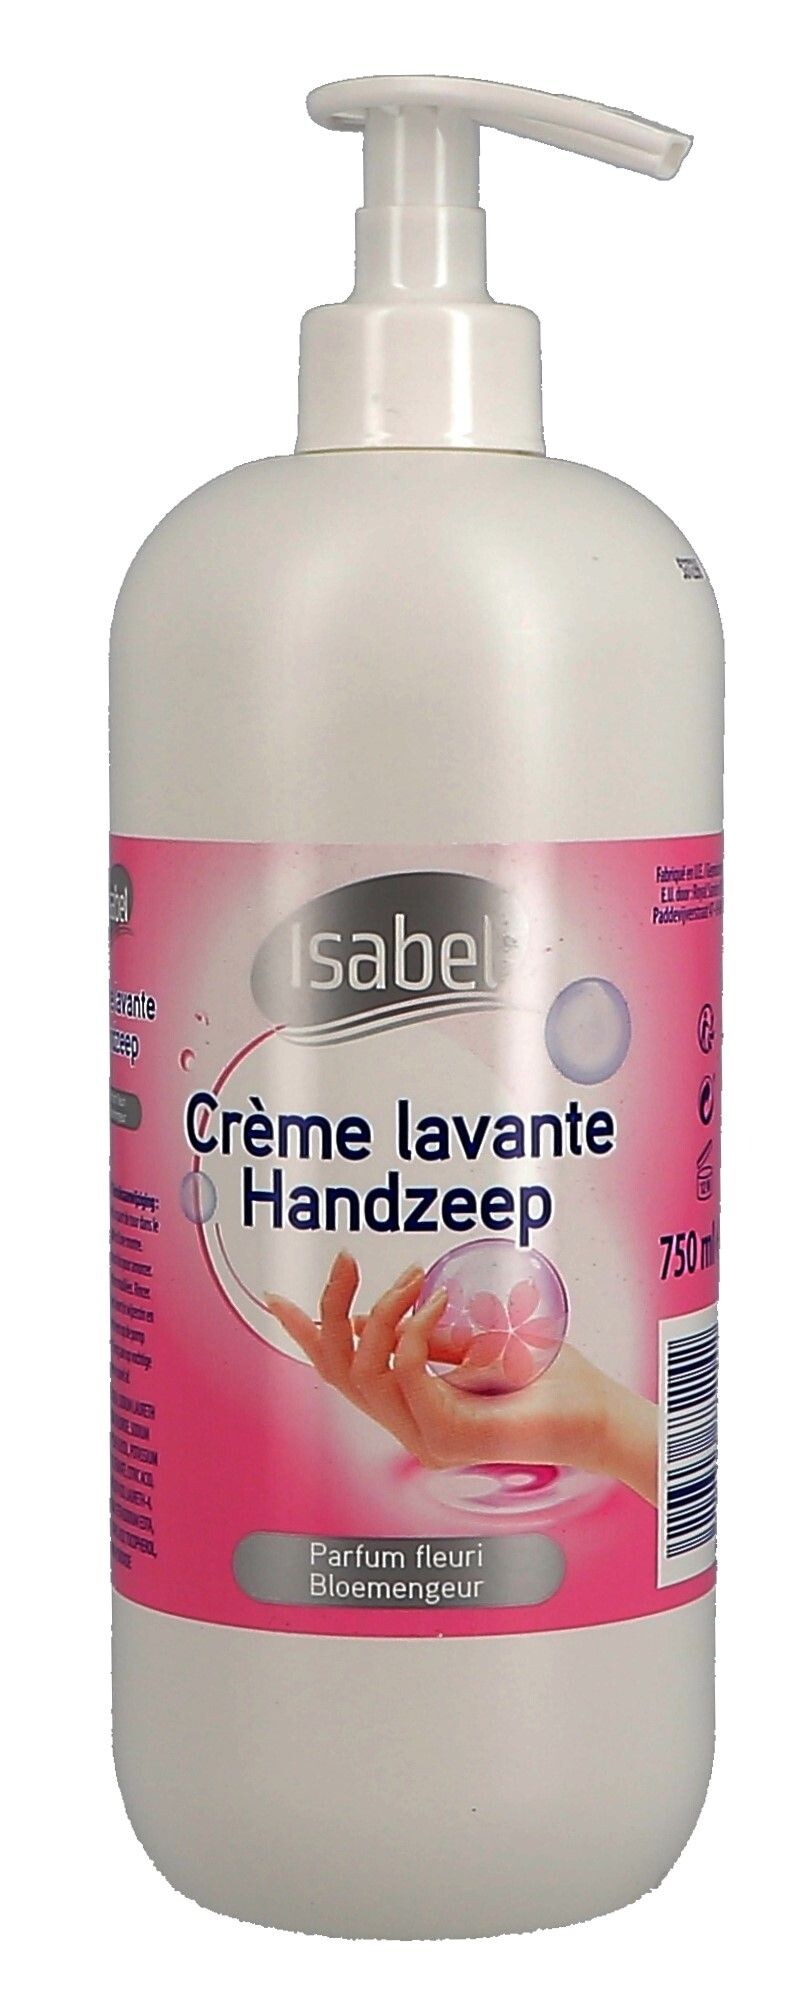 Isabel Hand Soap 750ml bottle with pump